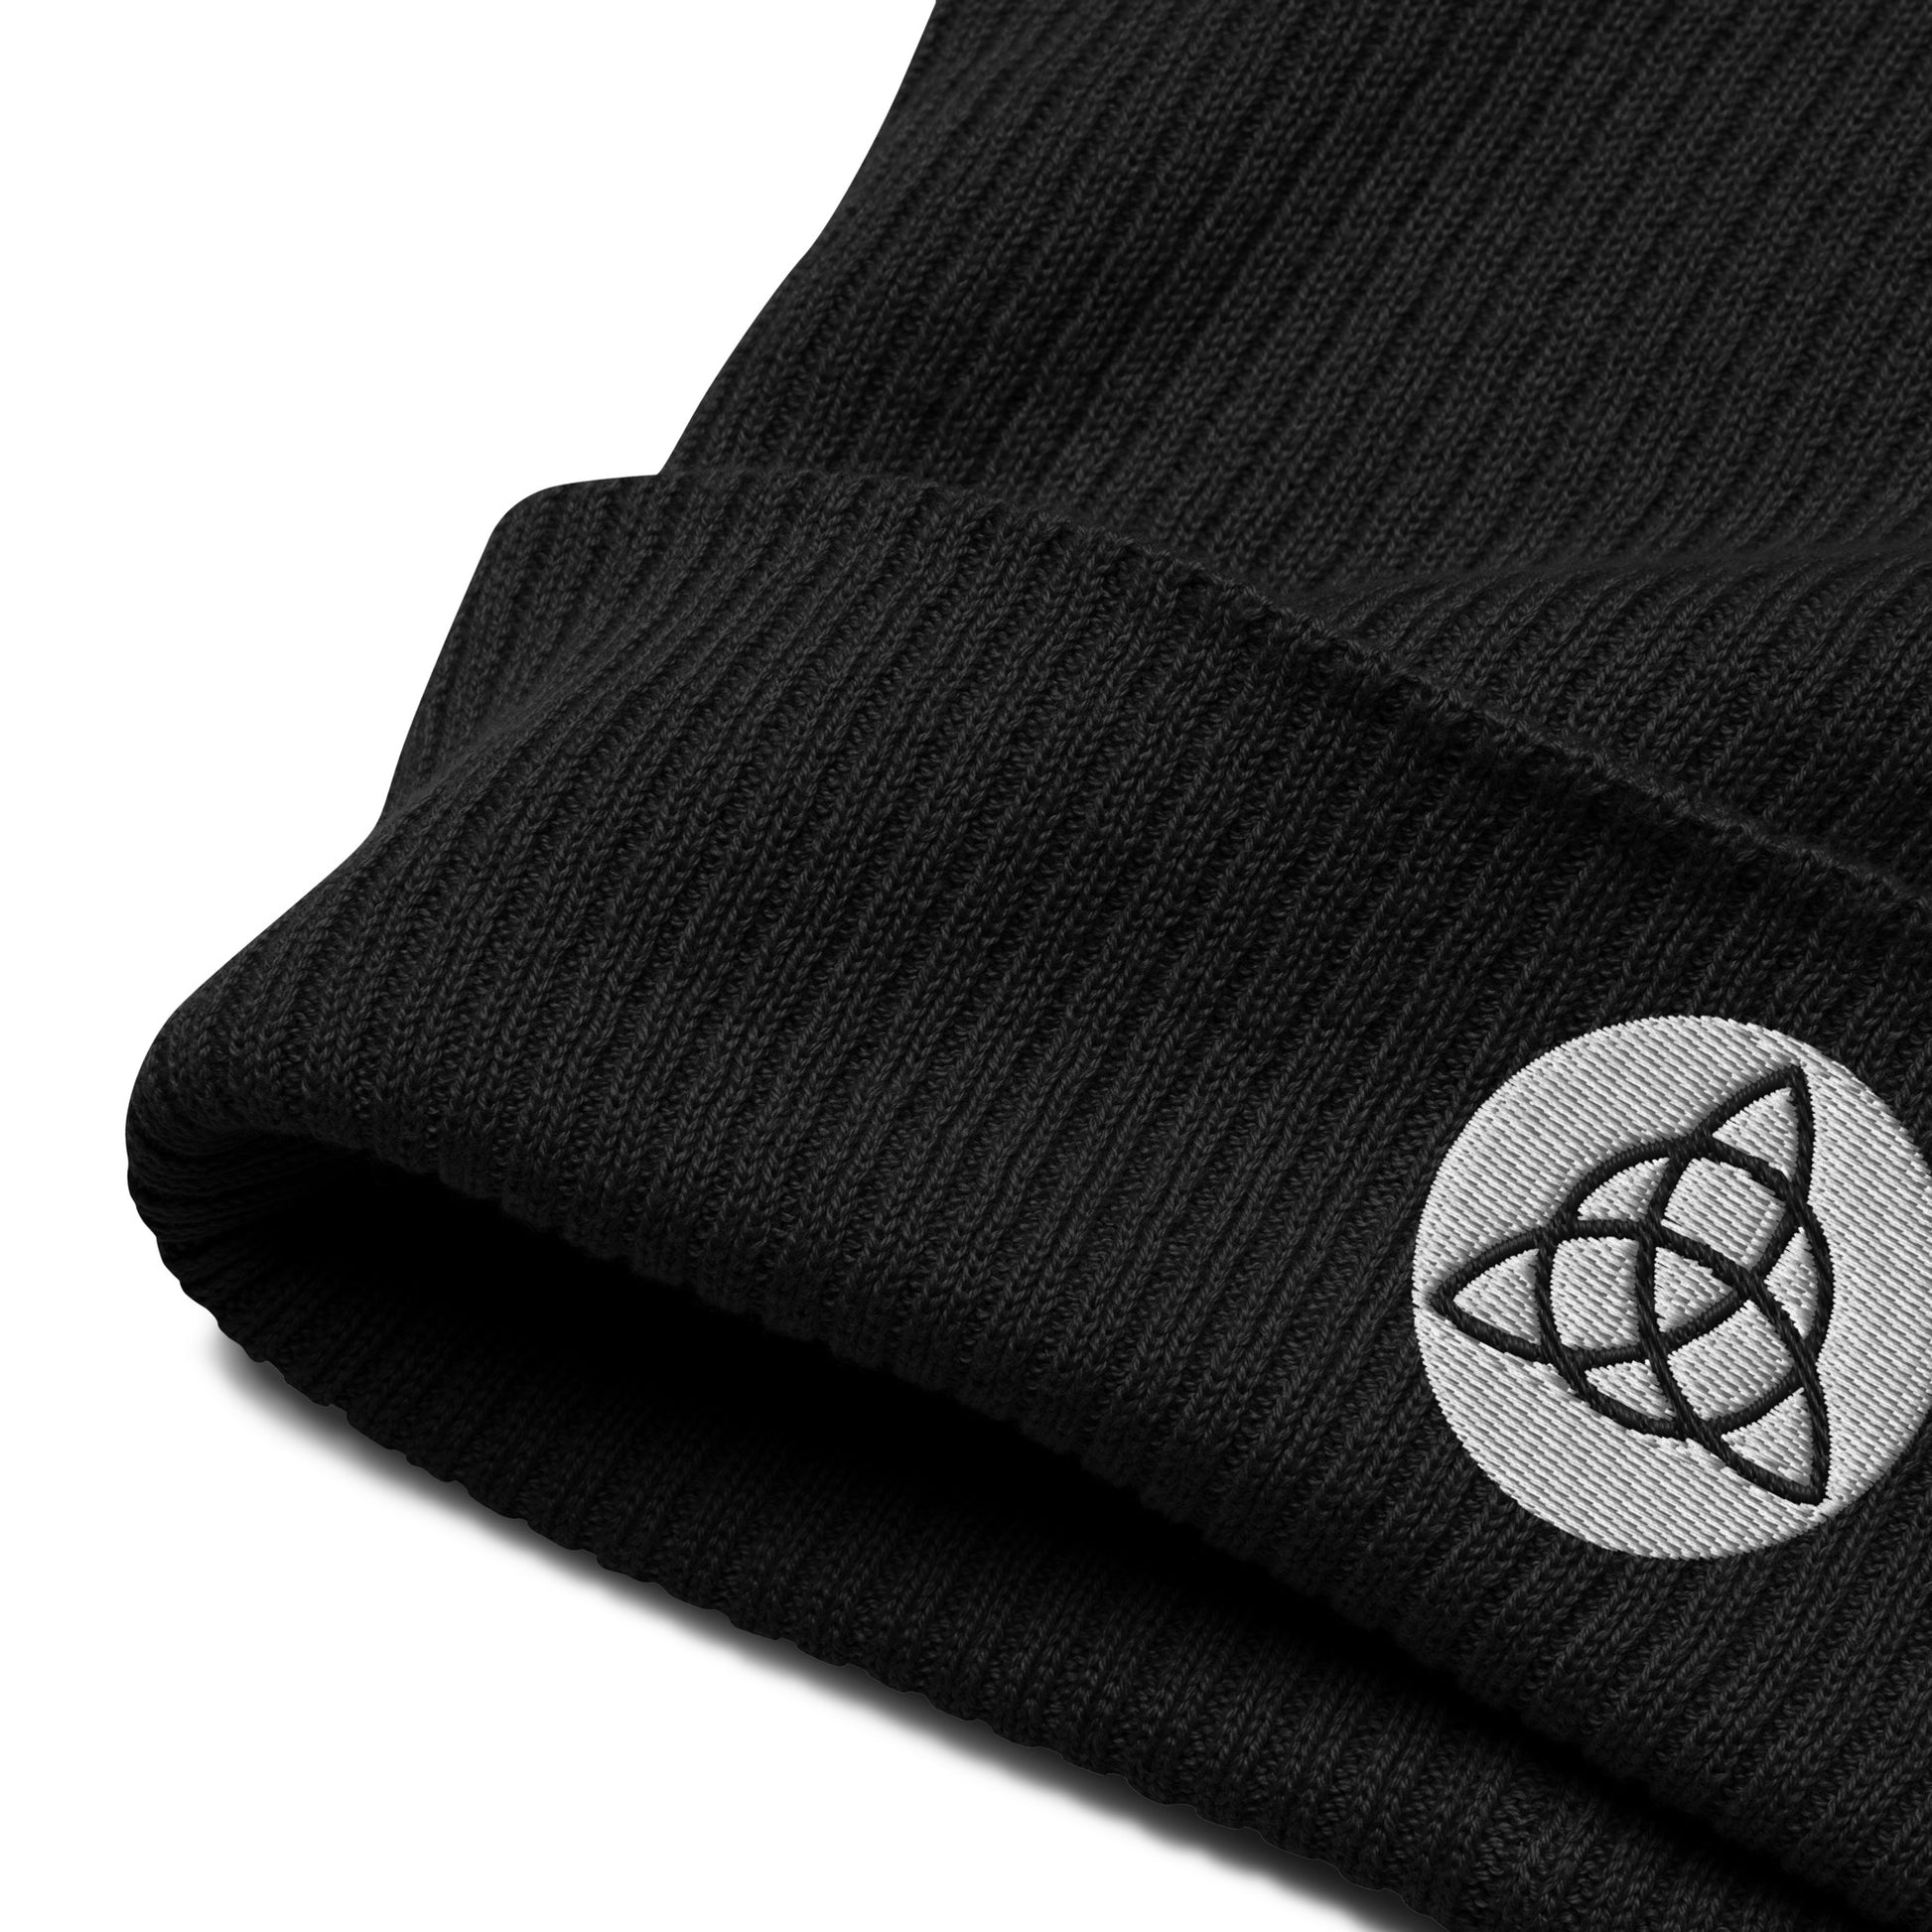 A ribbed beanie in Midnight Black hat made of organic cotton, embroidered with a Triquetra symbol, symbolizing unity, eternity, and the interconnectedness of mind, body, and spirit. This organic ribbed beanie is chic, versatile, and environmentally conscious, making it an essential addition to your hat collection. Crafted from breathable lightweight fabric, it's suitable for both indoor and outdoor wear. Made with hypoallergenic and natural materials.